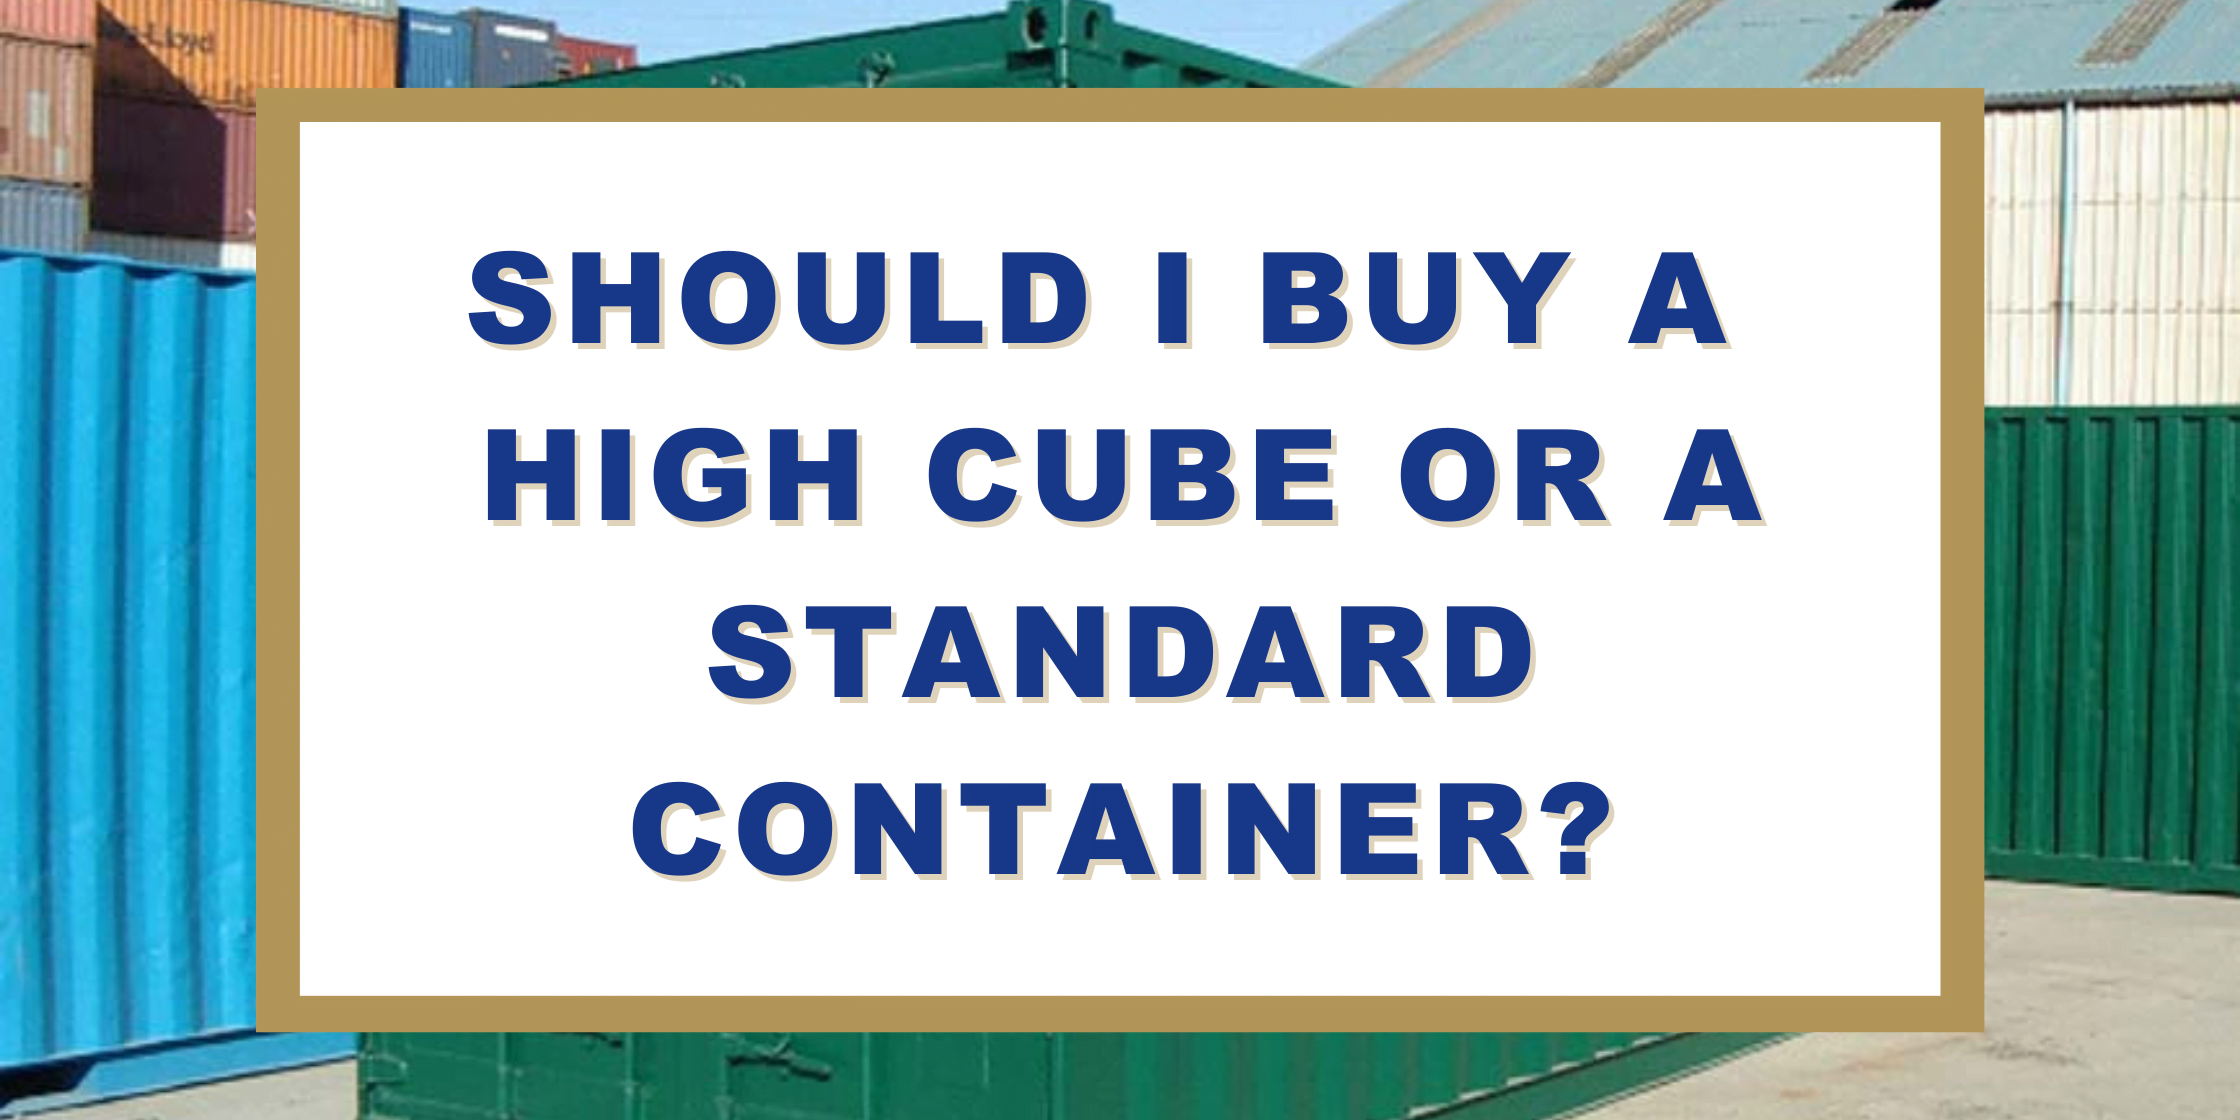 Shipping Container Size: Should I Buy a High Cube or a Standard Container?